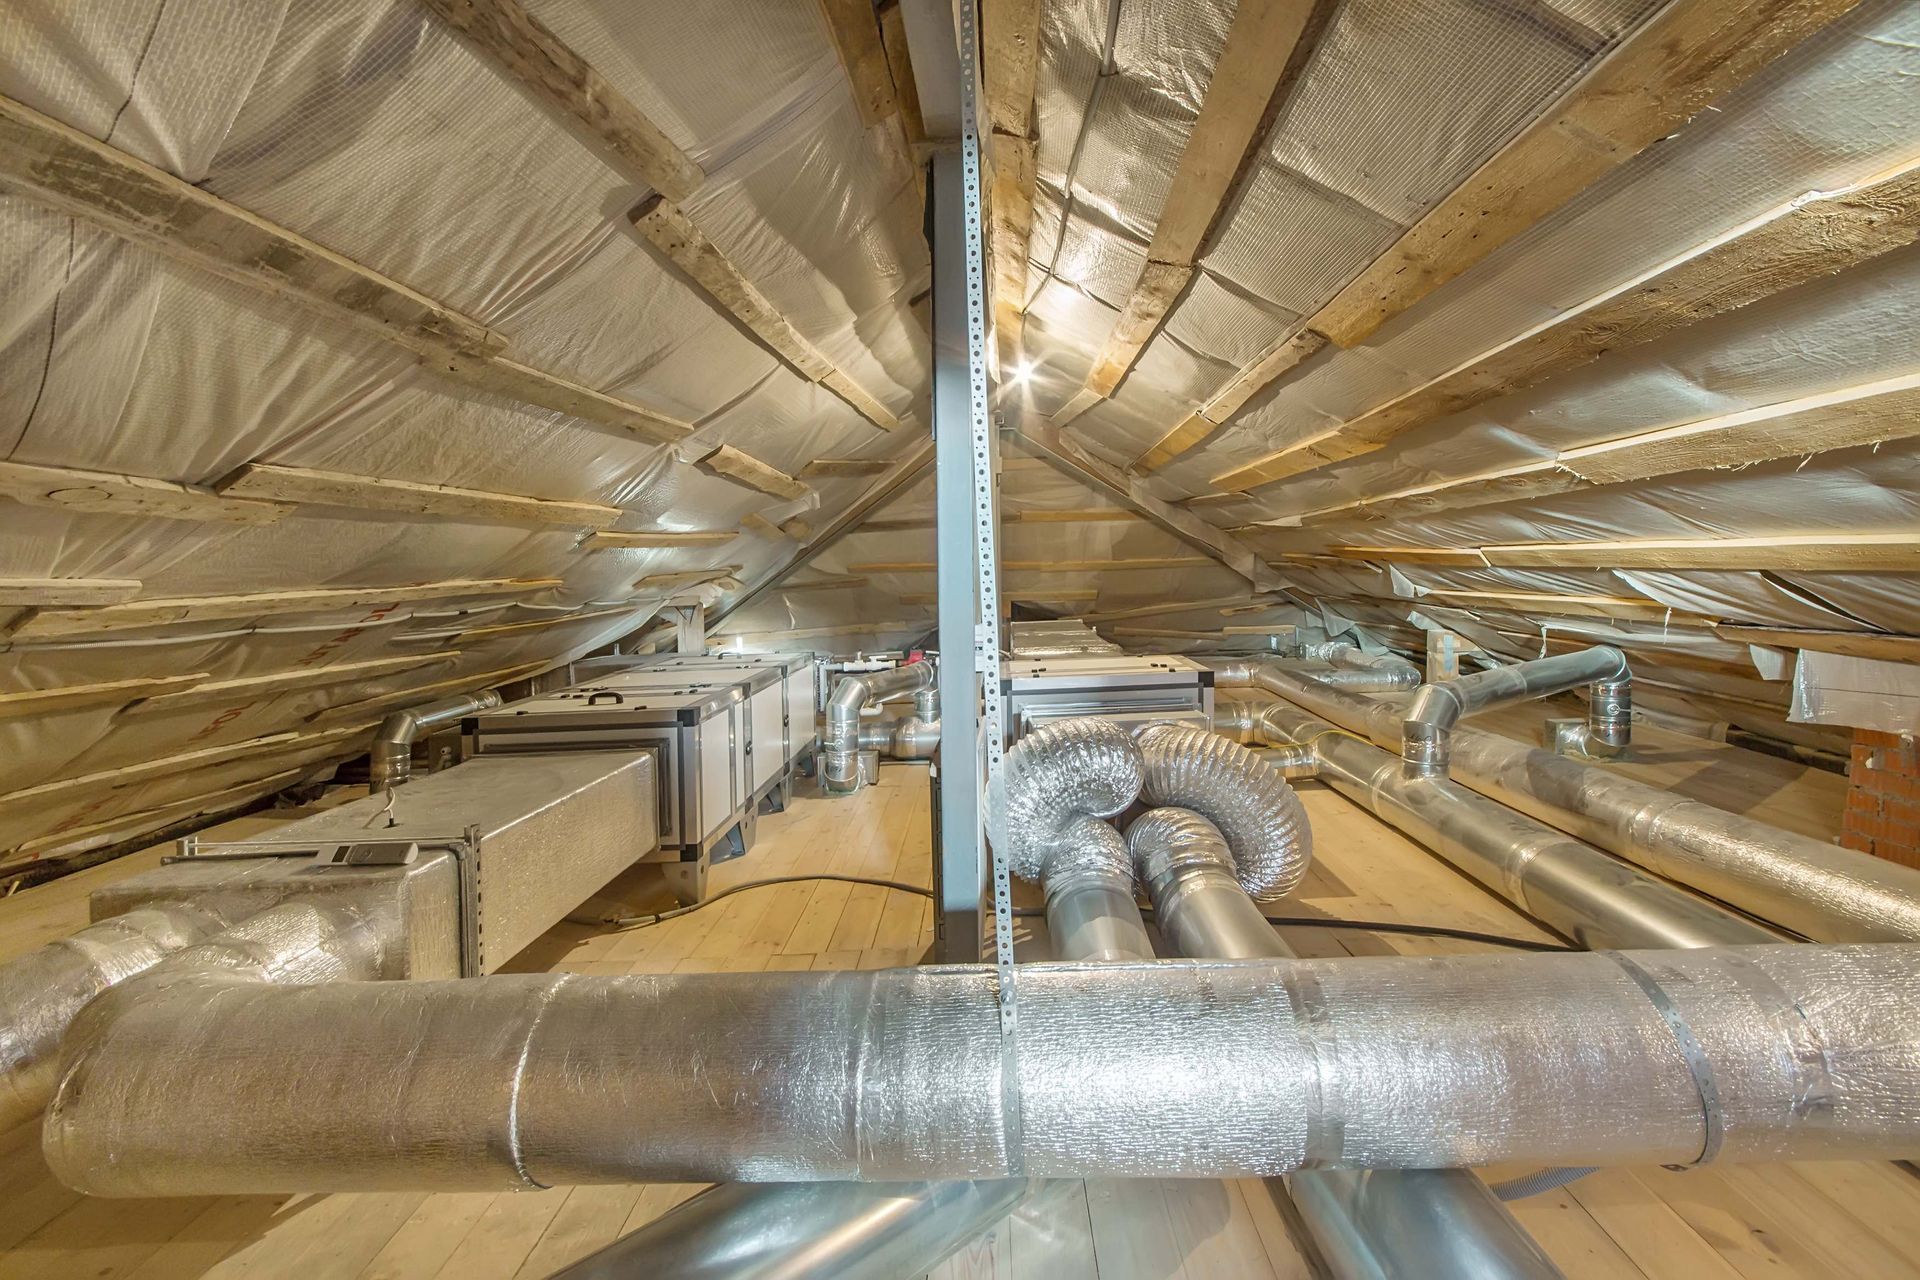 There are a lot of pipes in the attic of a house